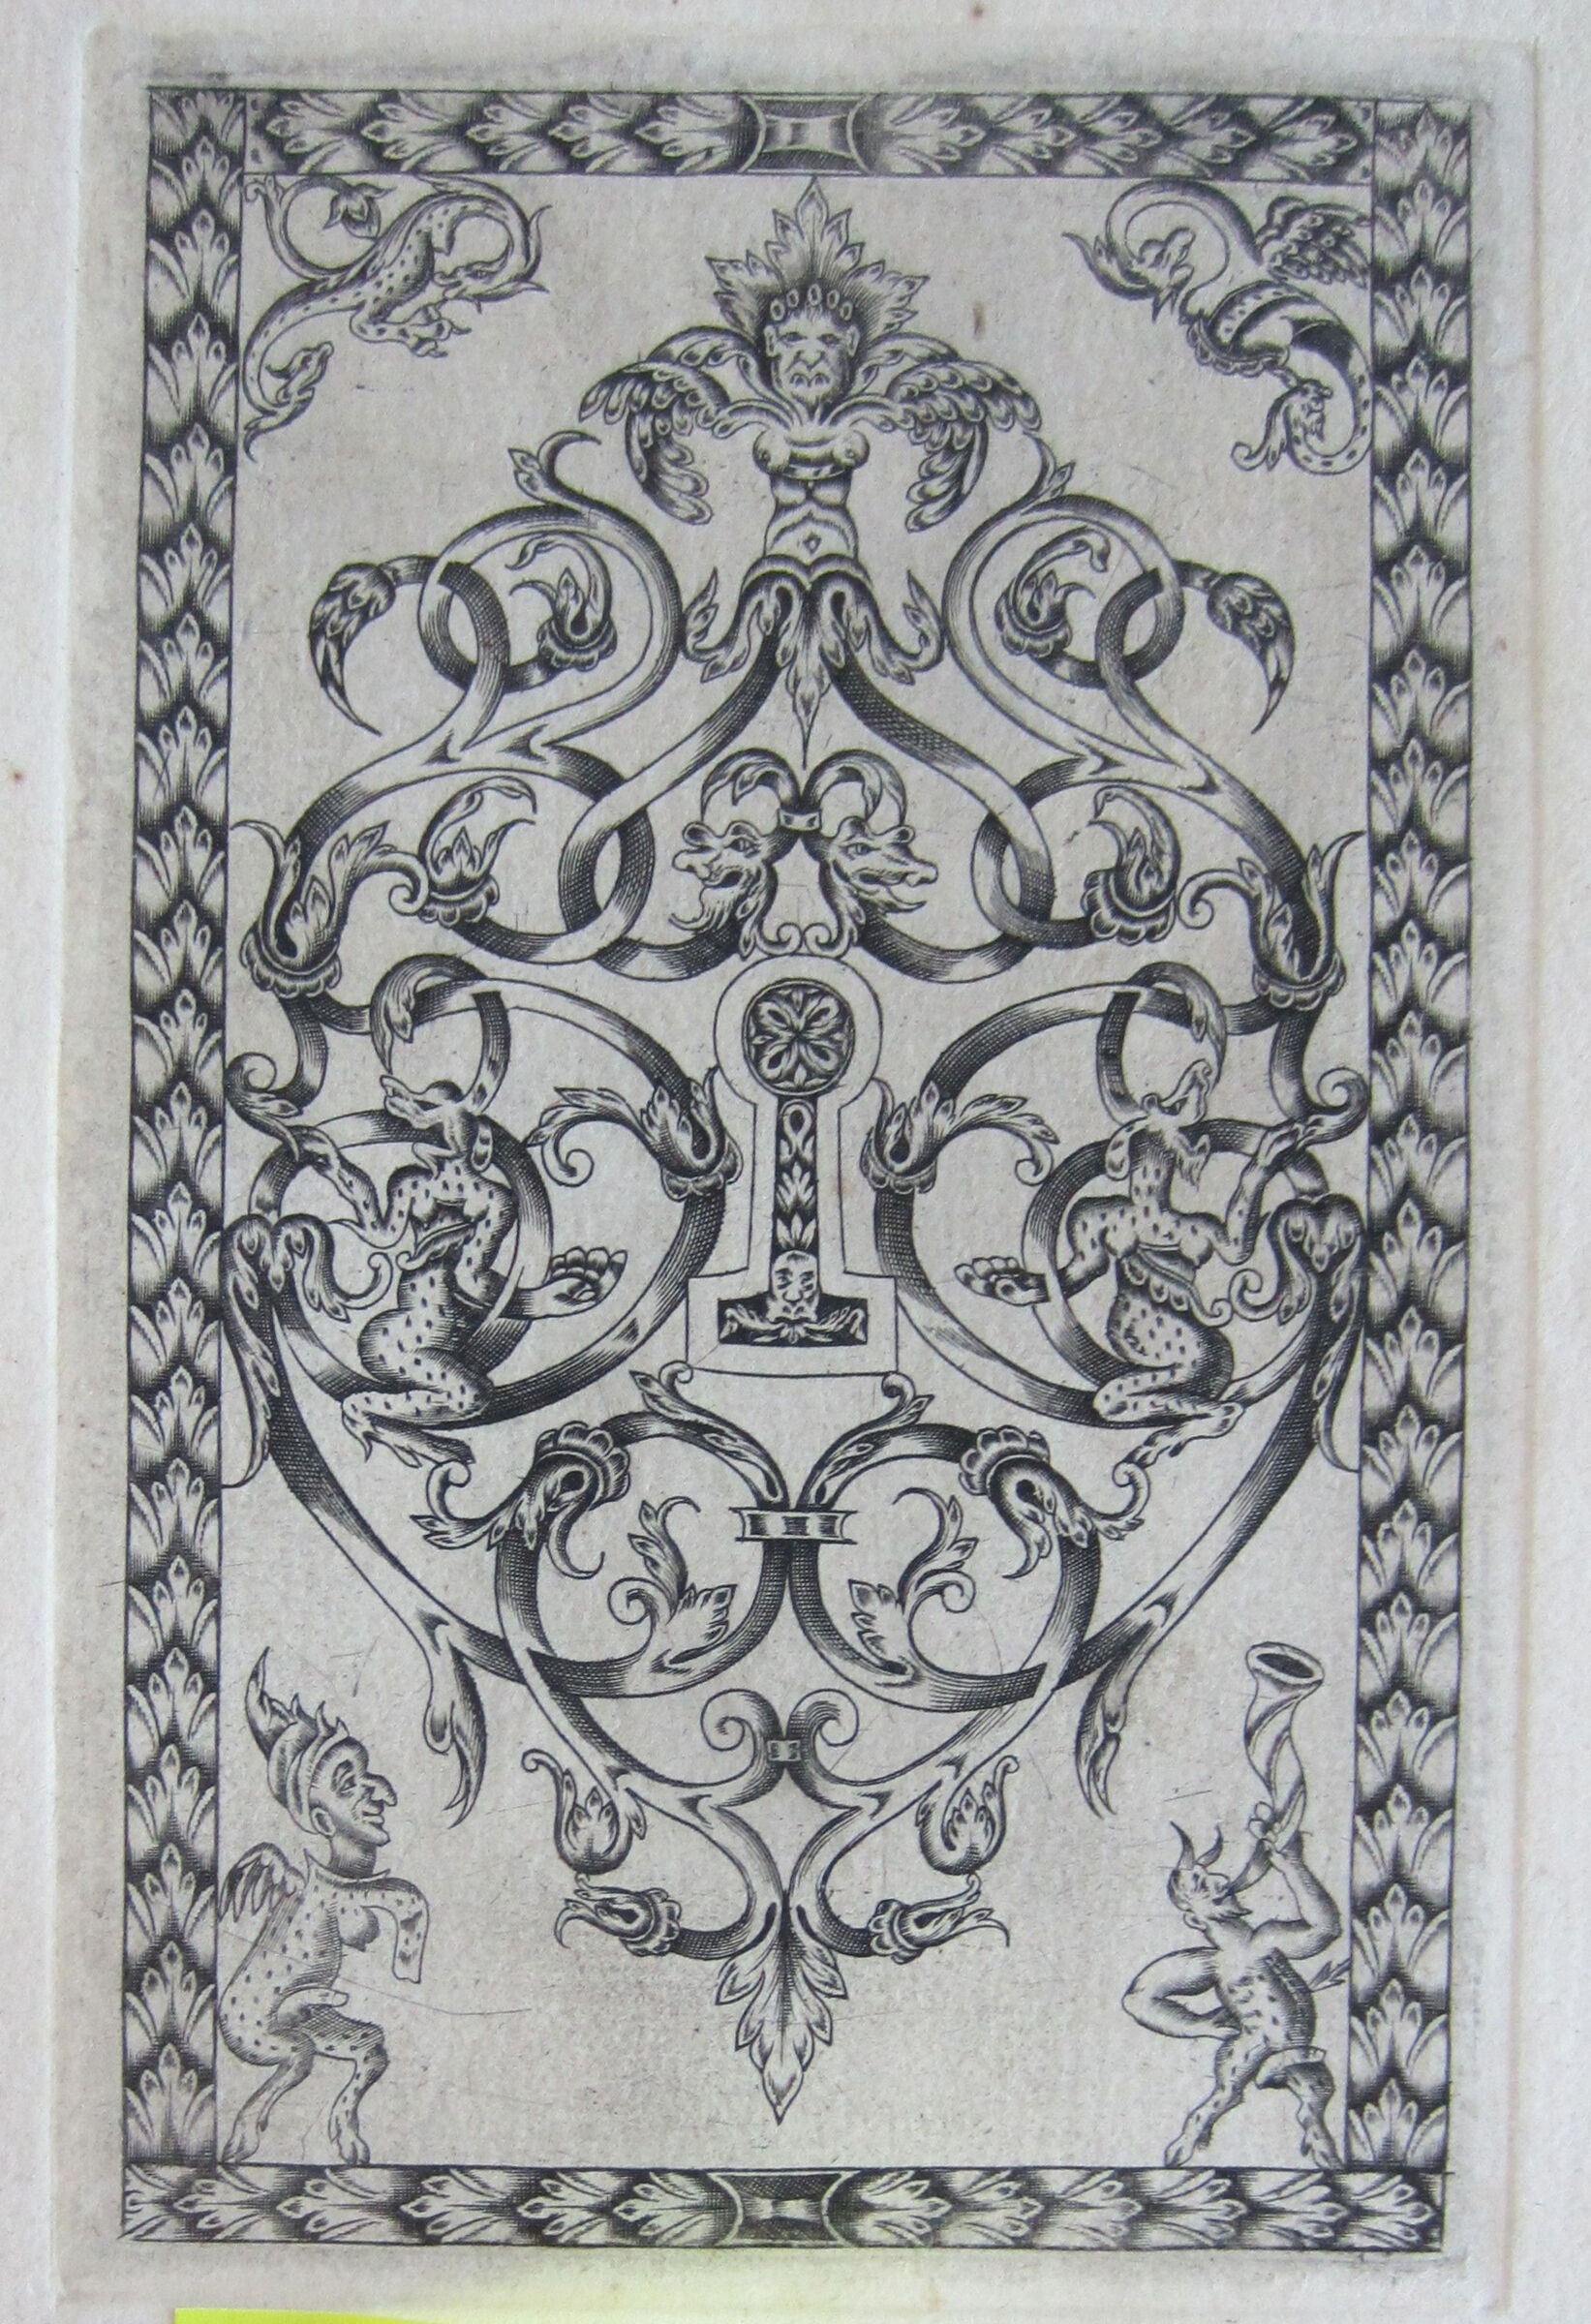 Interlace With Masks And Dappled Monsters, A Centered Keyhole Ornamented With A Four-Petaled Blossom